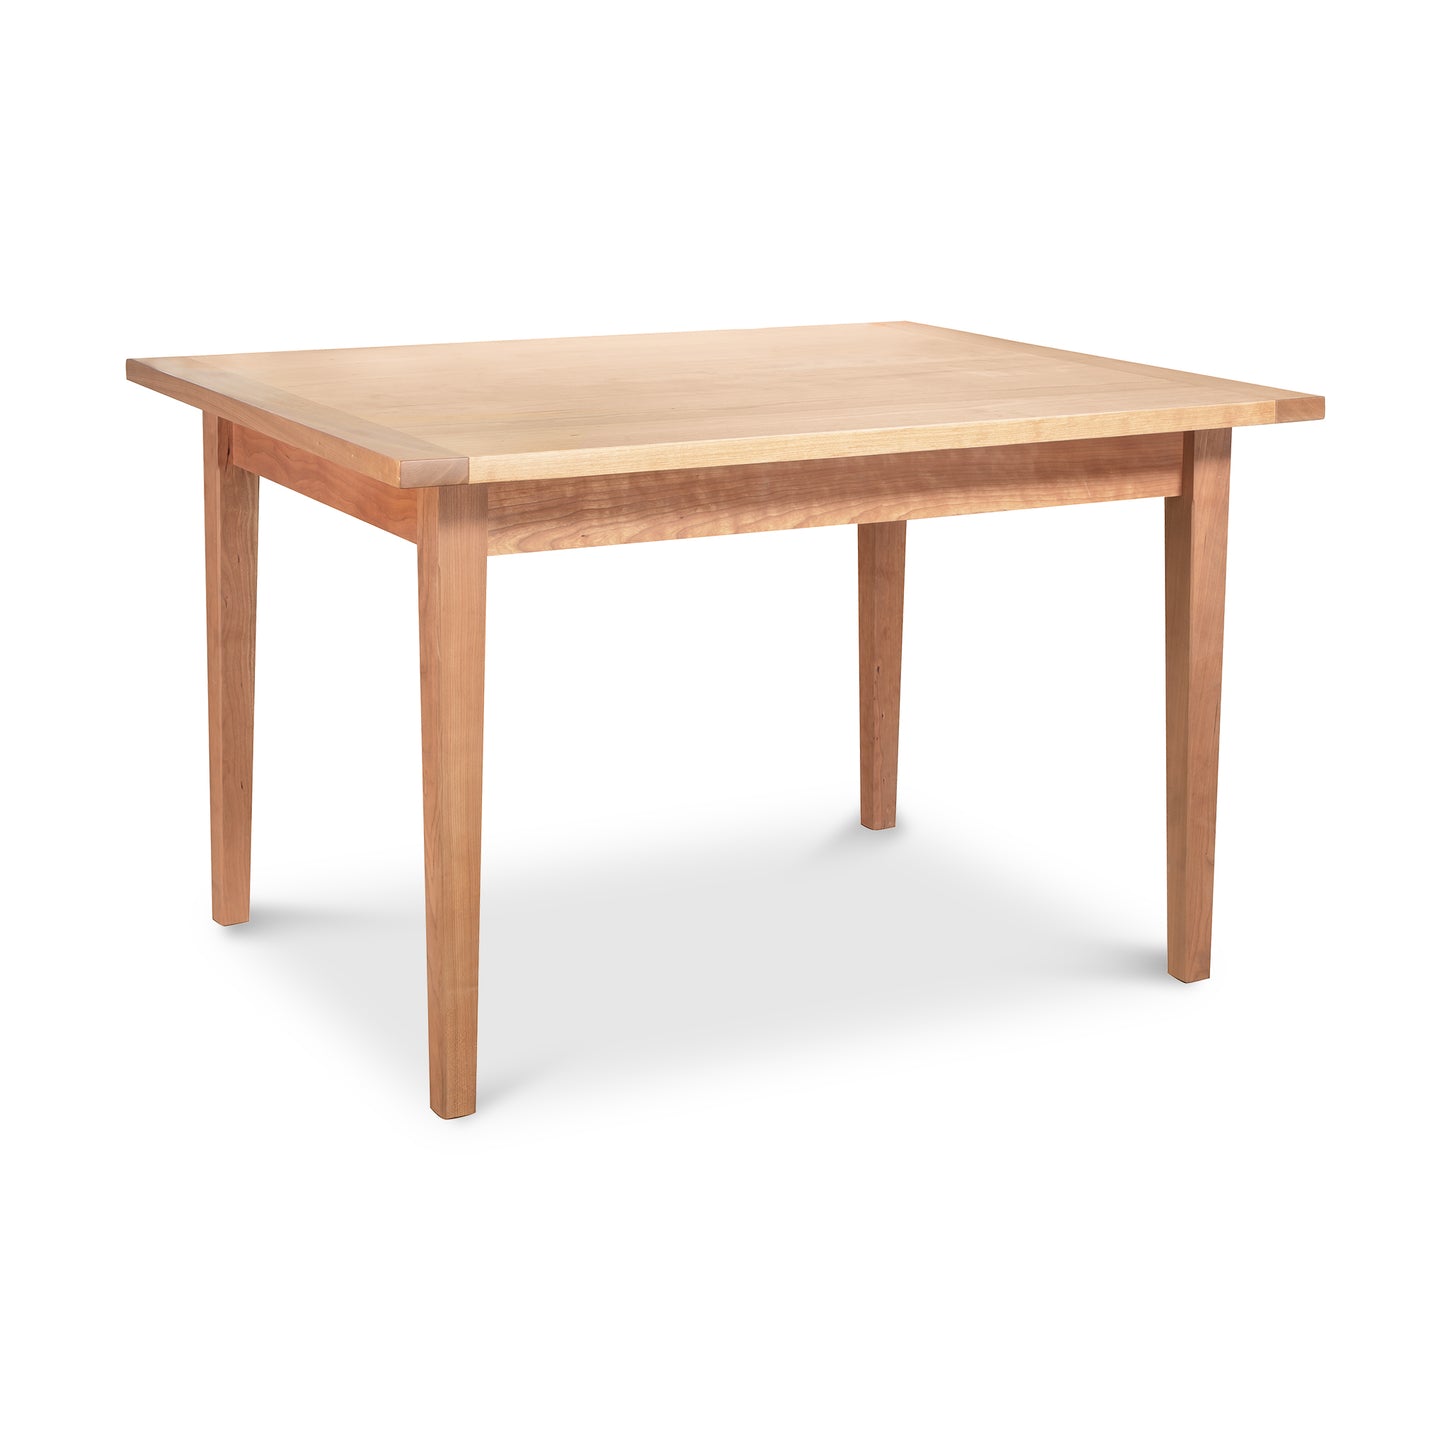 A simple wooden Maple Corner Woodworks Vermont Shaker Solid Top Harvest Dining Table with a light finish and four sturdy legs, isolated on a white background.